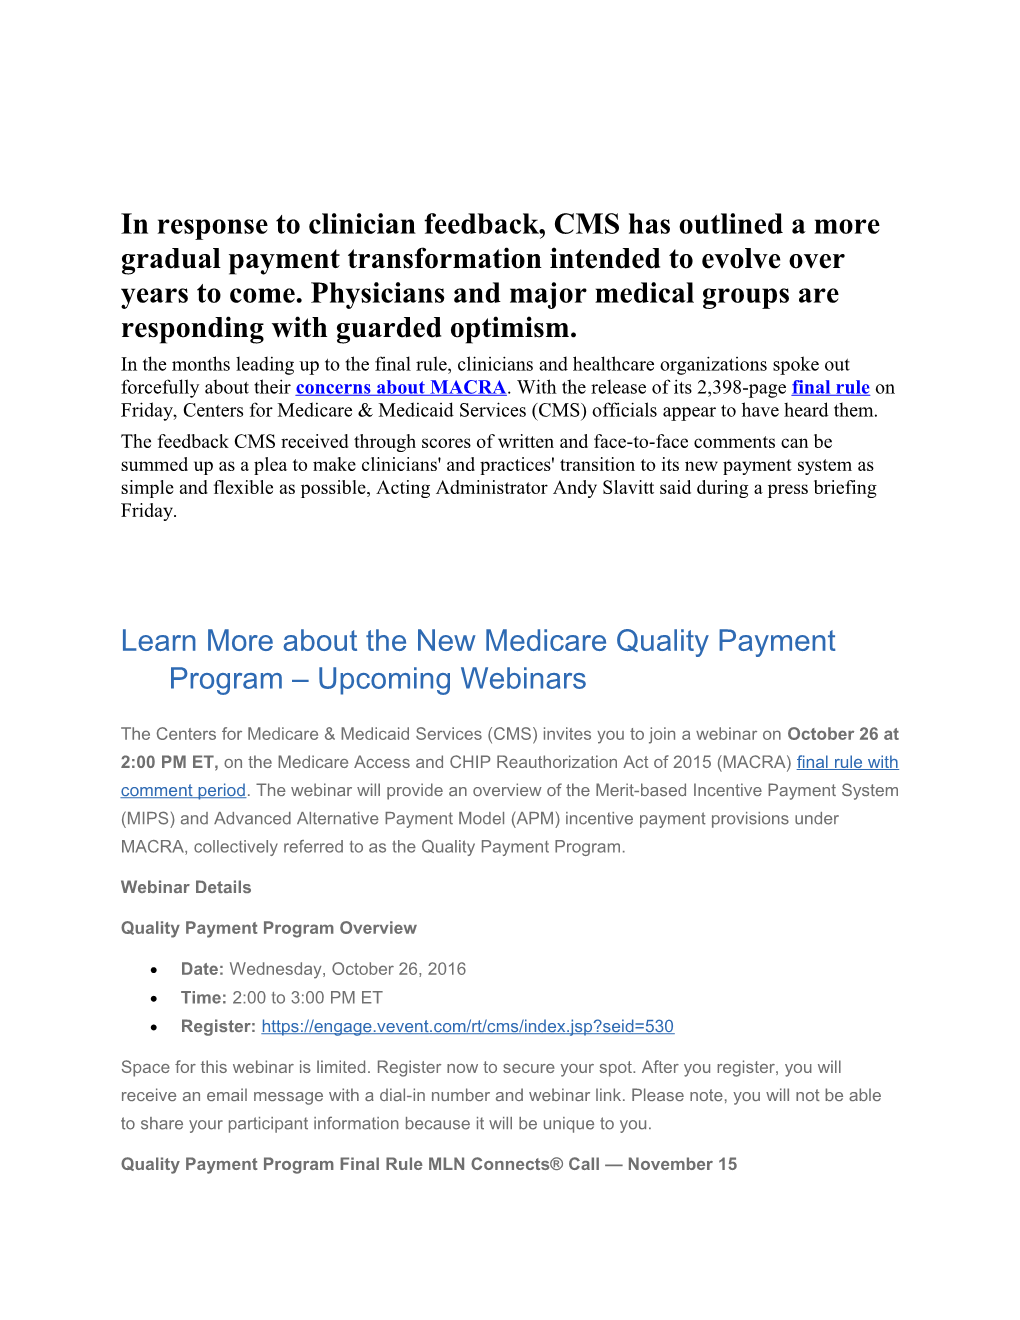 Learn More About the New Medicare Quality Payment Program Upcoming Webinars